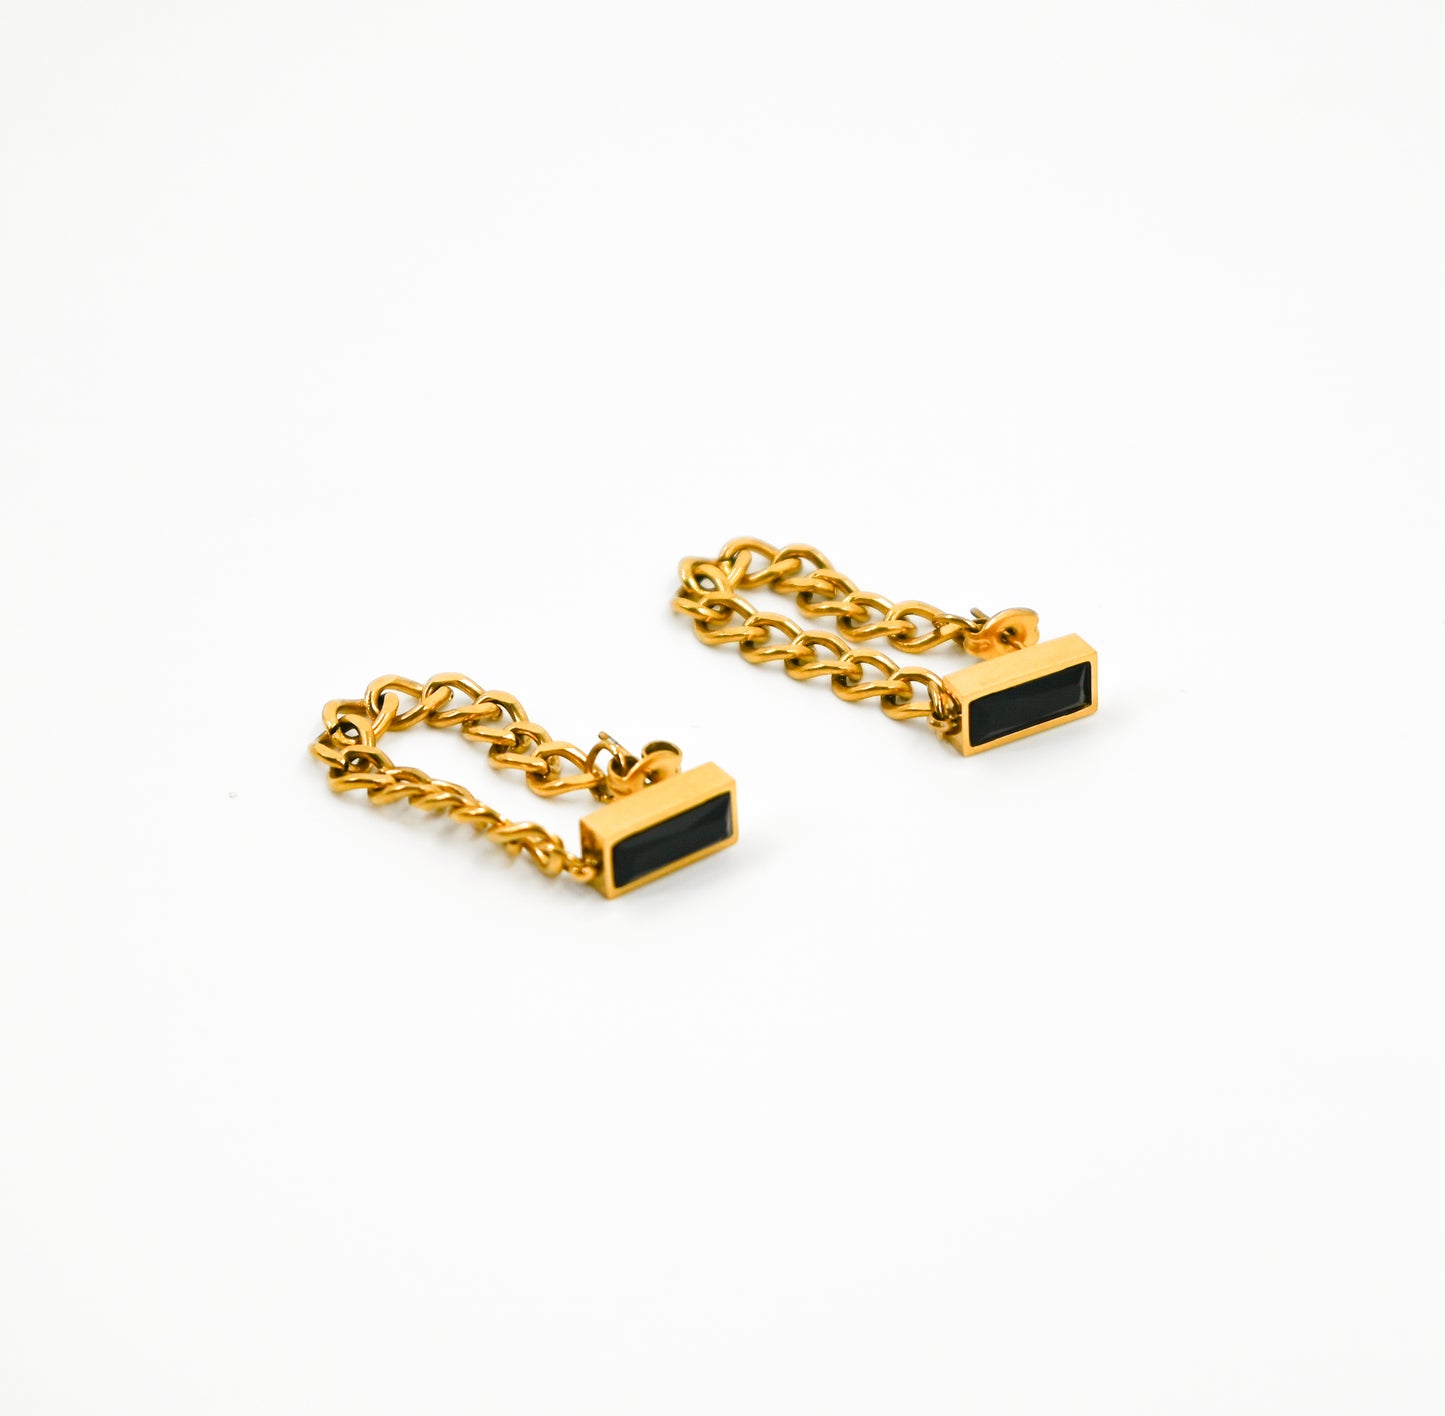 gold chain earrings with black stone accent 